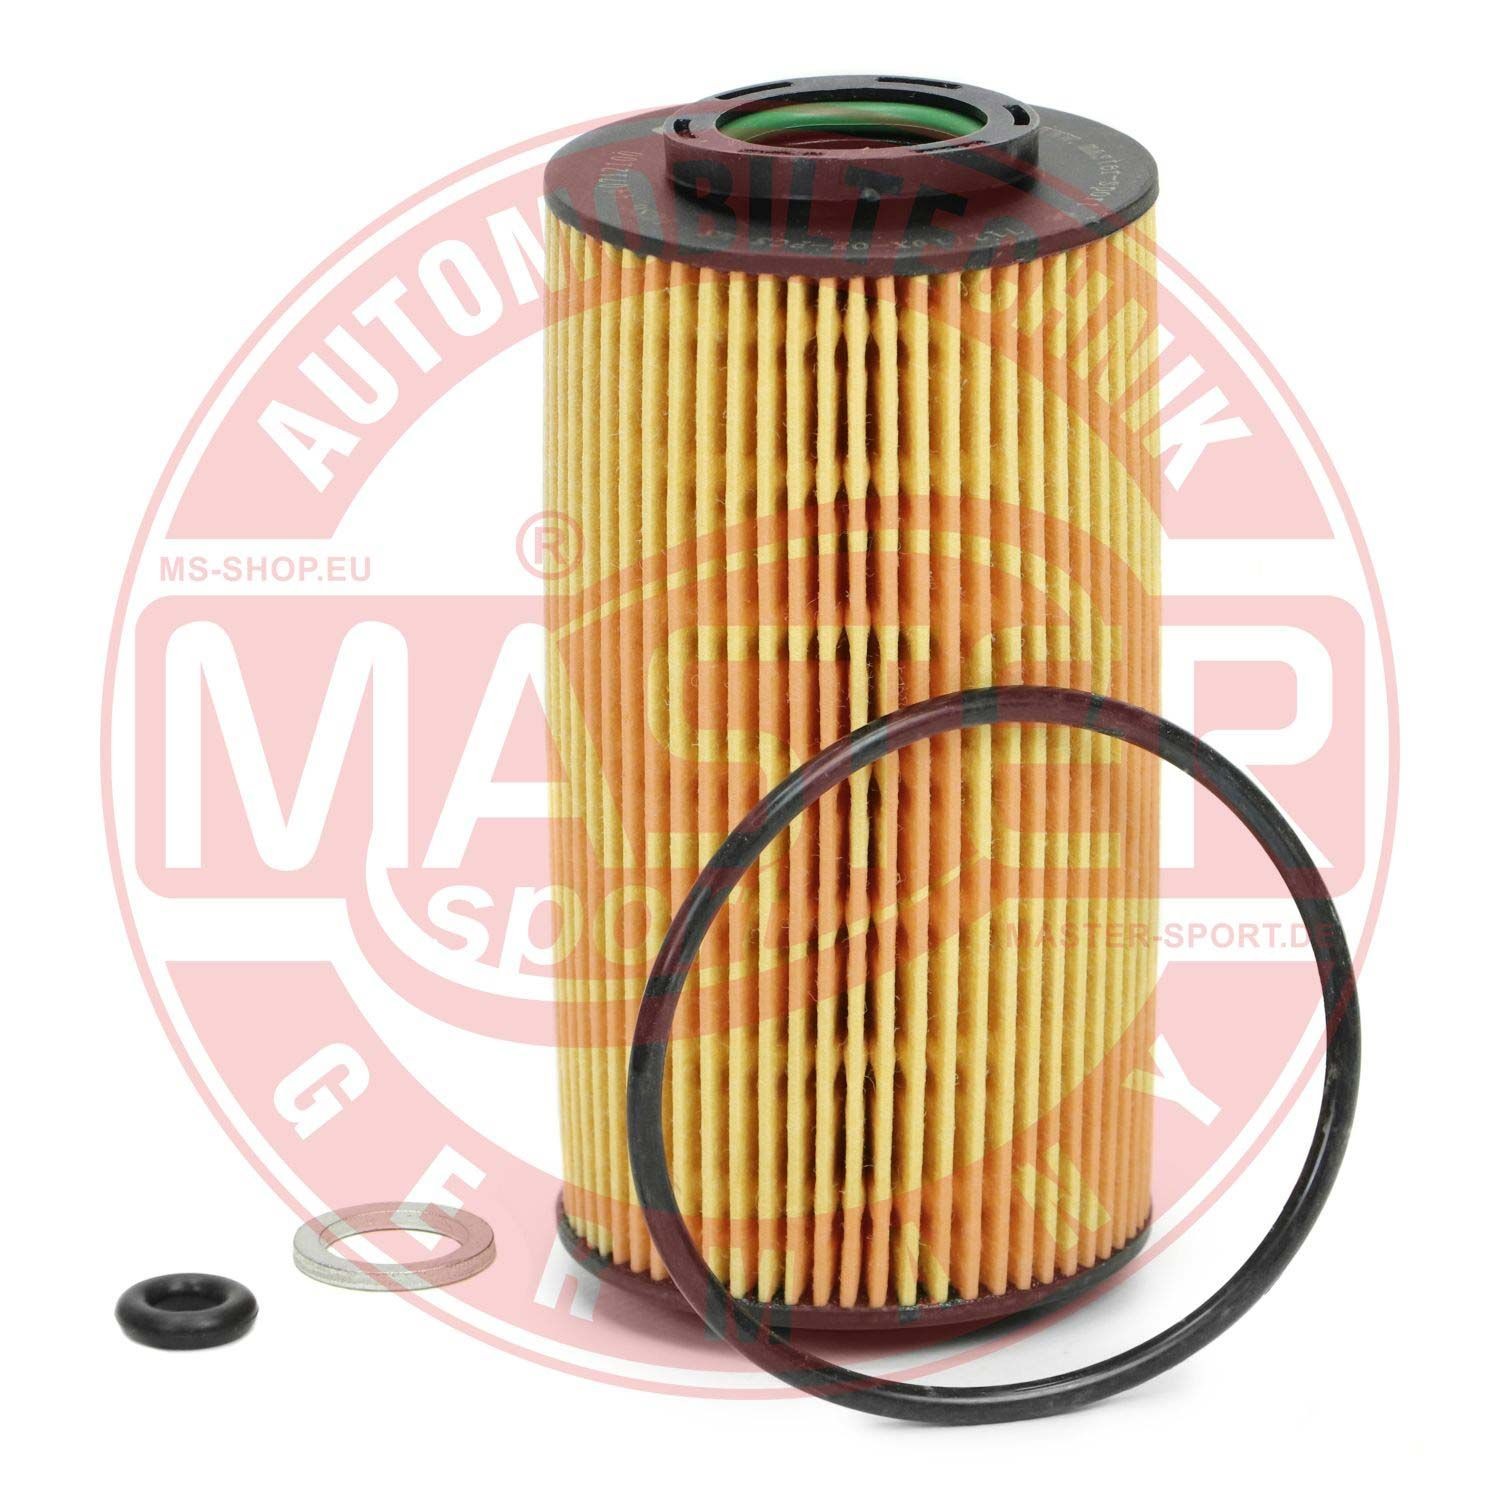 MASTER-SPORT 712/10X-OF-PCS-MS Oil filter with gaskets/seals, Filter Insert